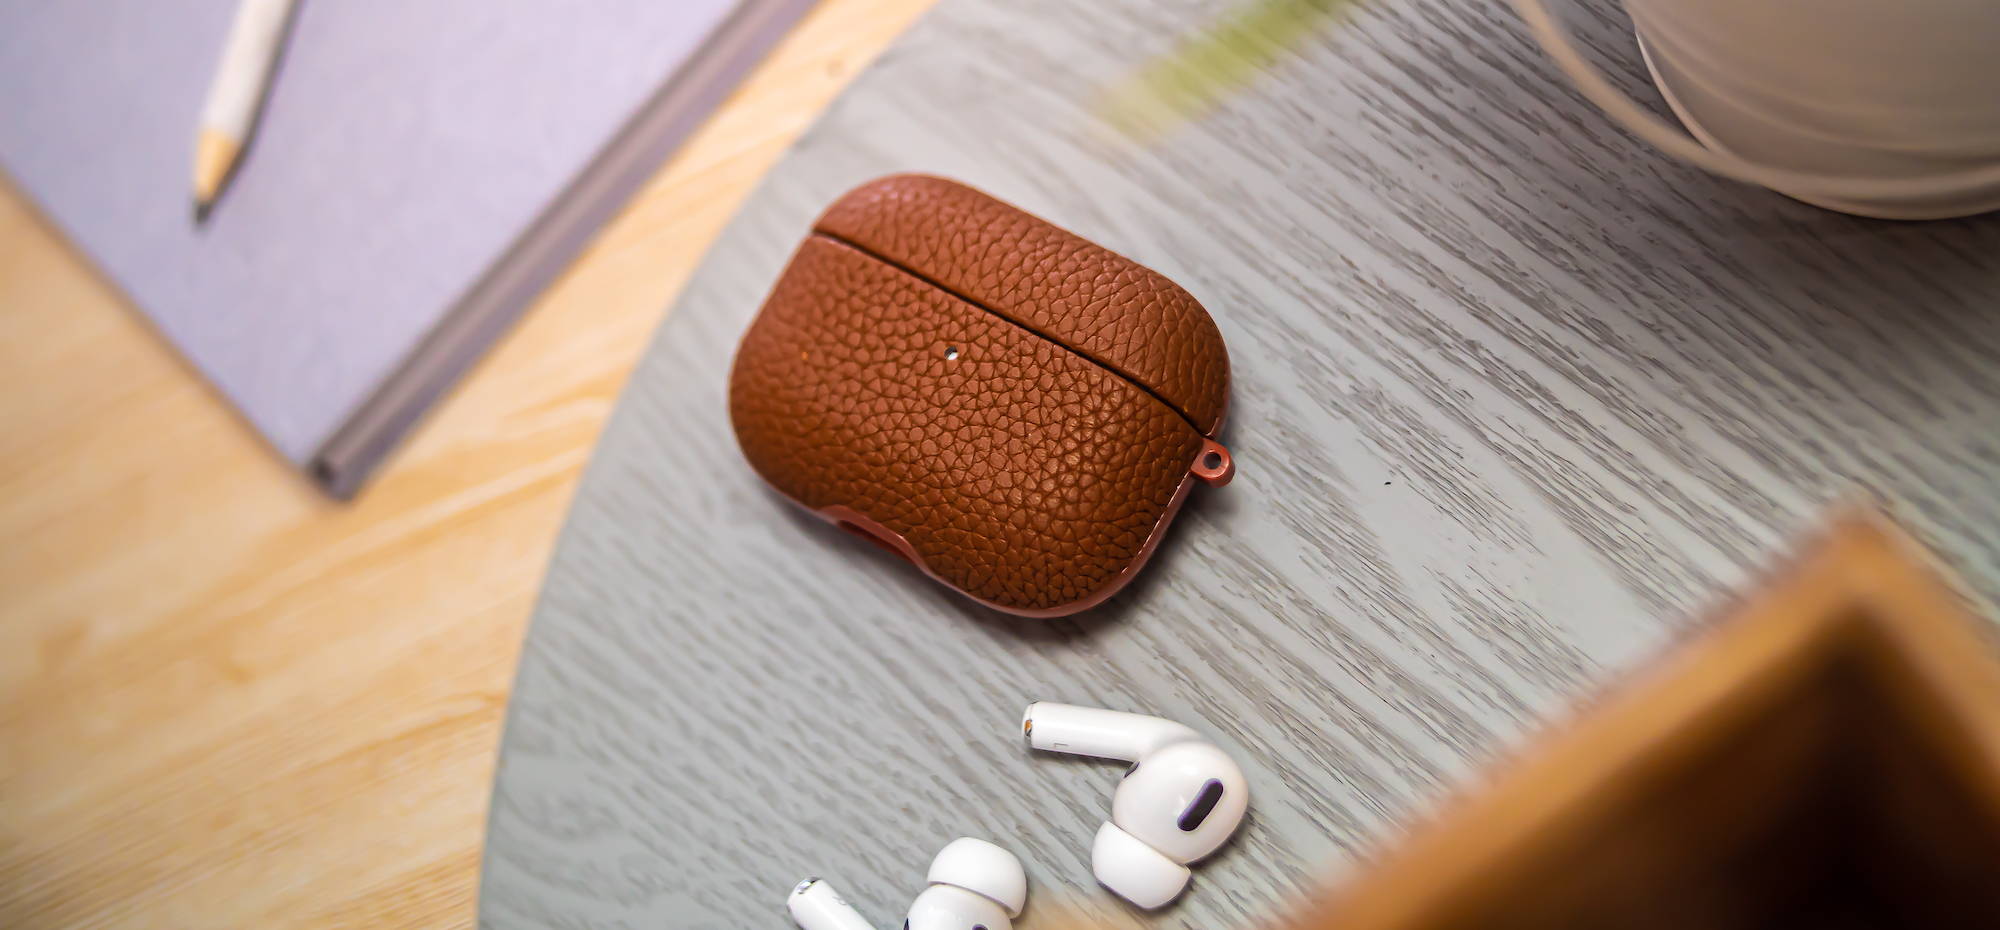 Brown genuine leather airpods pro case laying on grey wooden table 